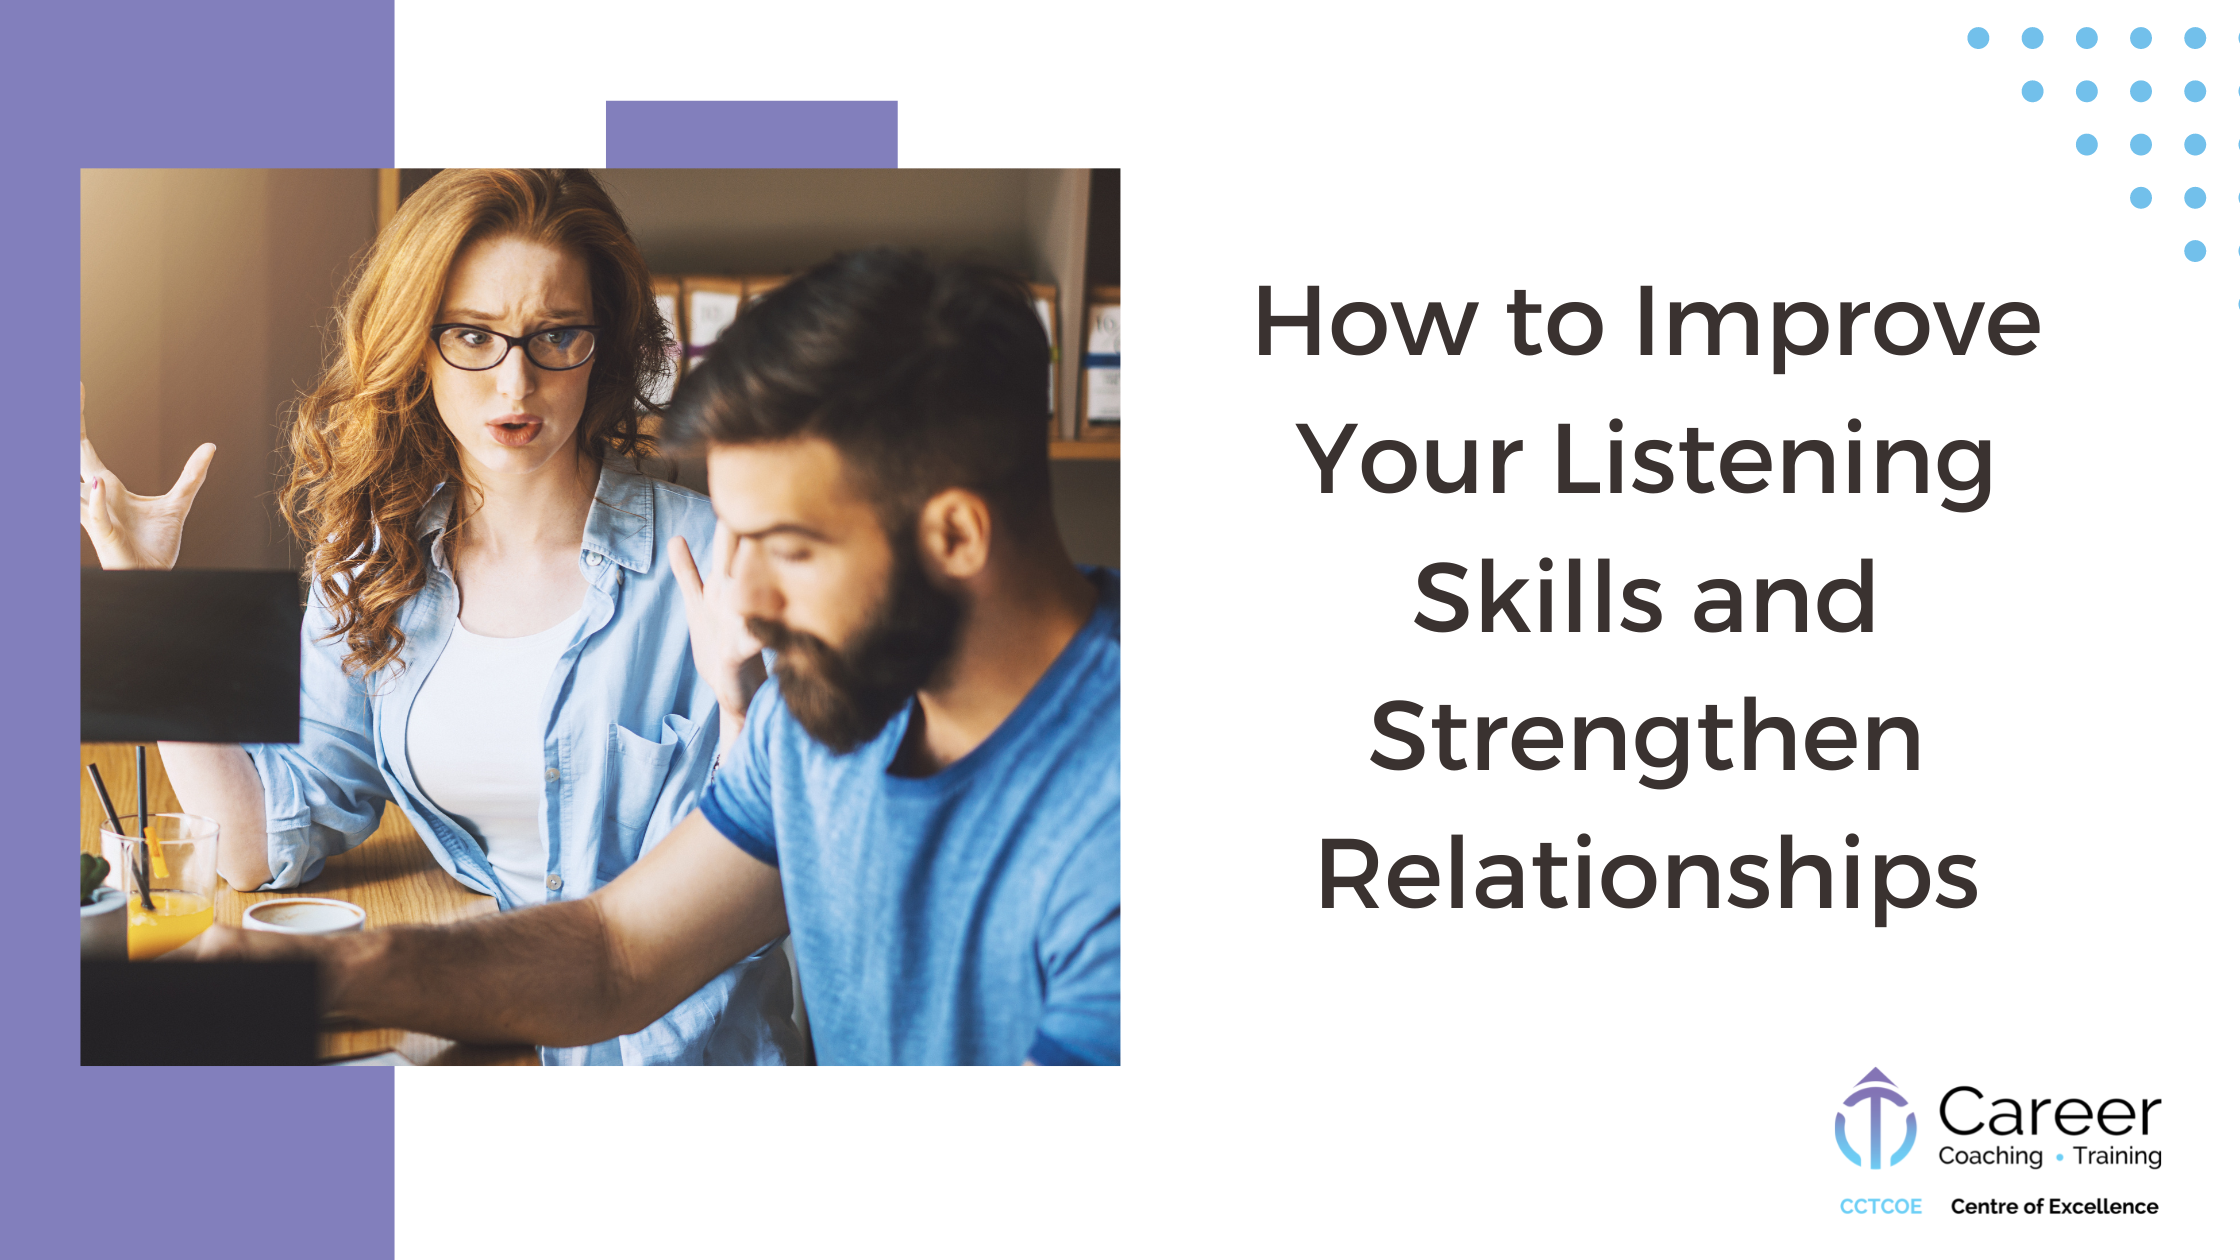 How to Improve Your Listening Skills and Strengthen Relationships